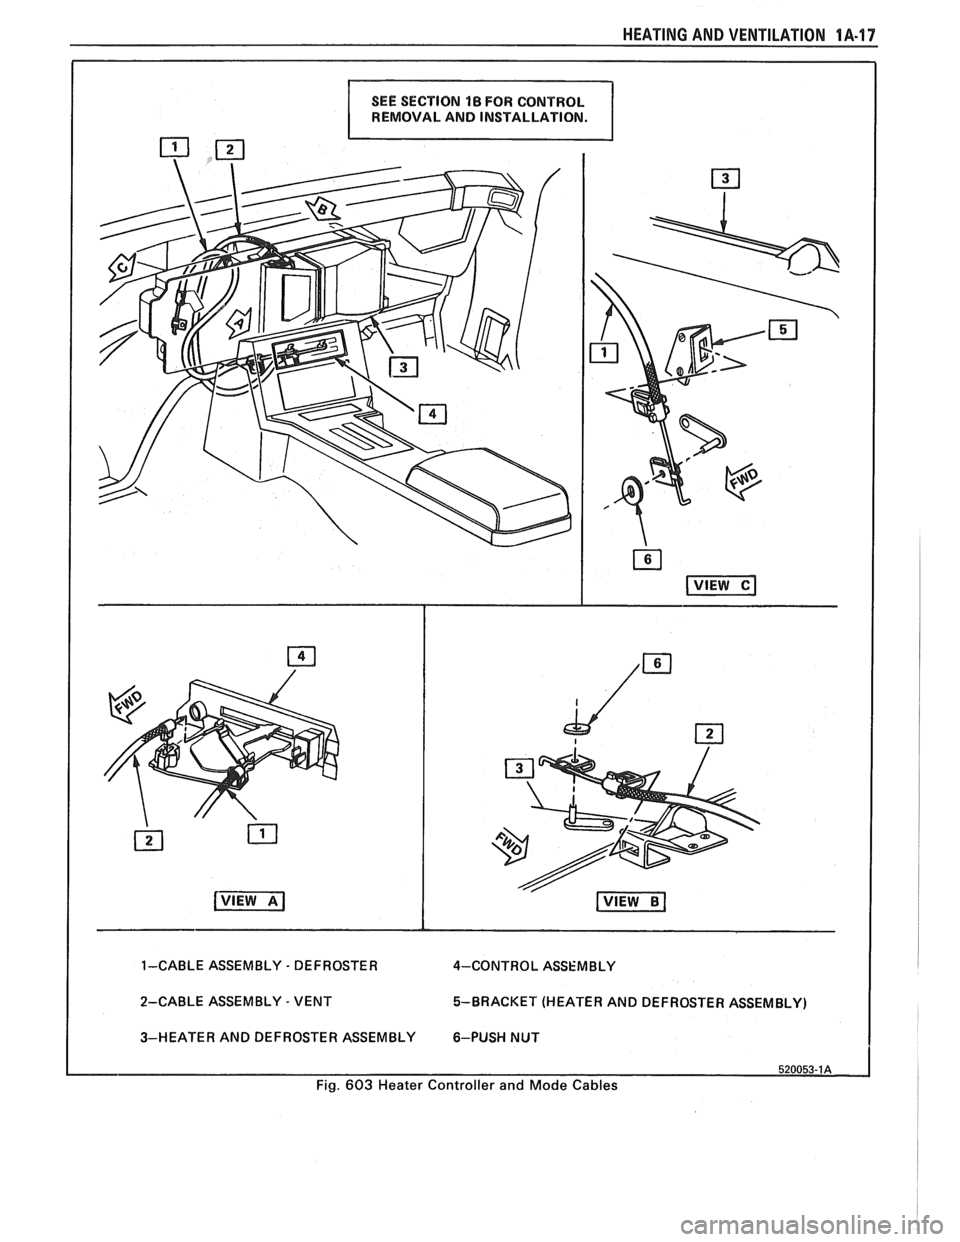 PONTIAC FIERO 1988  Service Owners Guide 
HEATING AND VENTILATION 1A-17 
REMOVAL  AND INSTALLATION. 
1-CABLE  ASSEMBLY - DEFROSTER 
4-CONTRO L ASSEMBLY 
2-CABLE  ASSEMBLY 
- VENT  5-BRACKET  (HEATER 
AND DEFROSTER ASSEMBLY) 
3-HEATER  AND DE